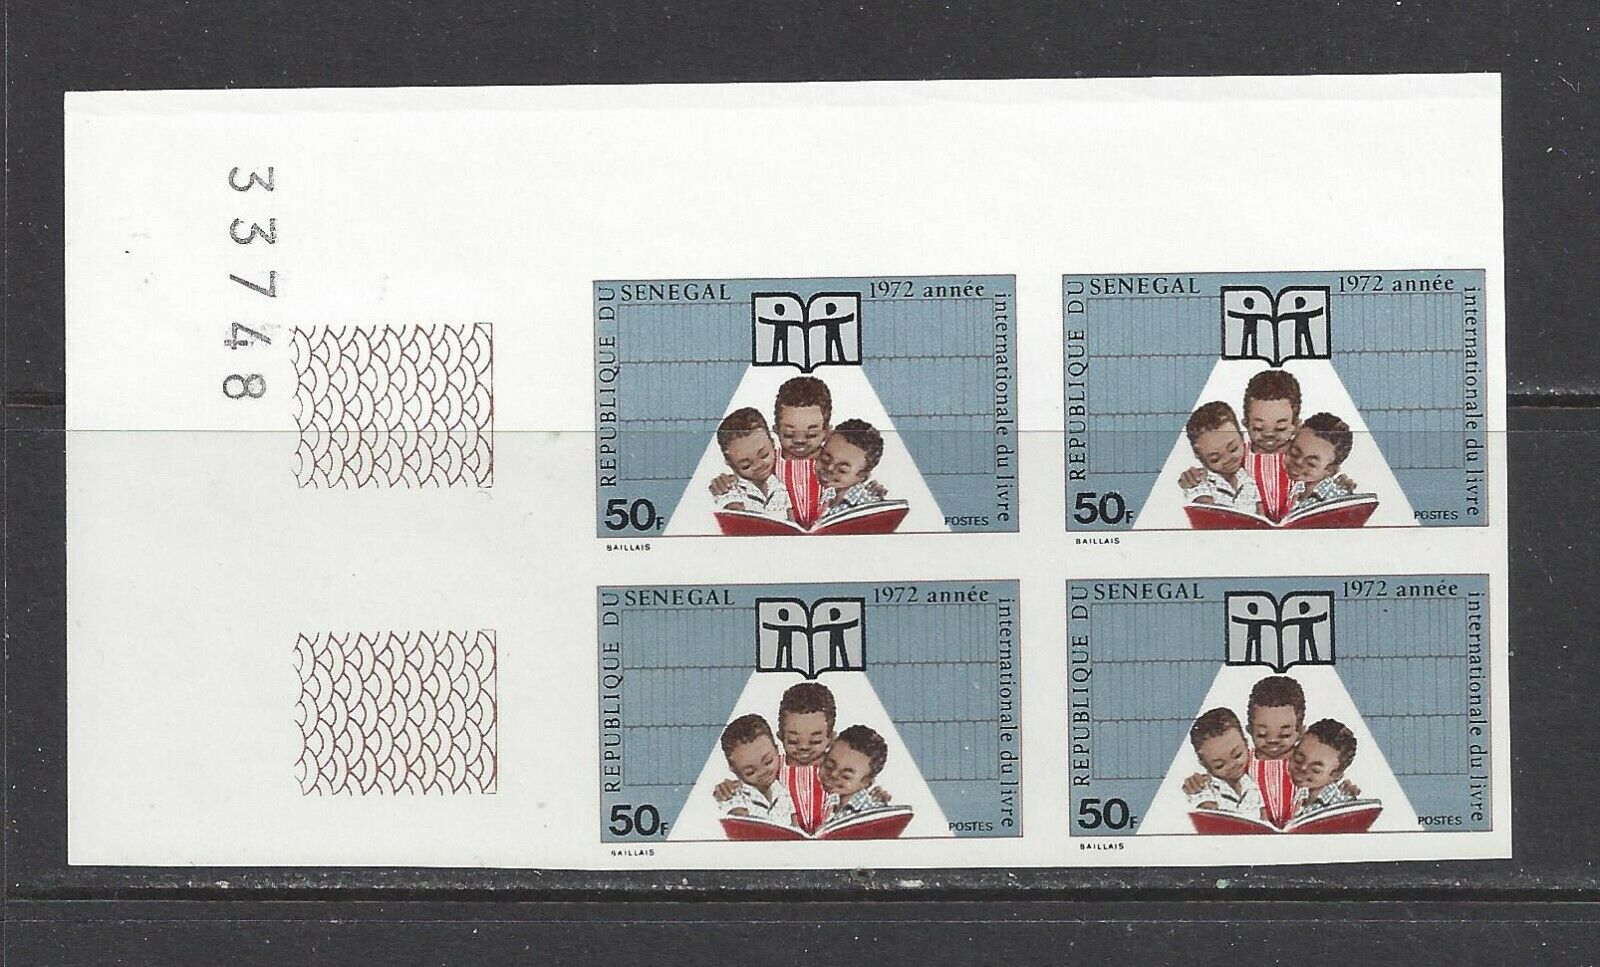 Senegal - 370 -  Imperf Block With Plate # - Mnh - 1972 -international Book Year